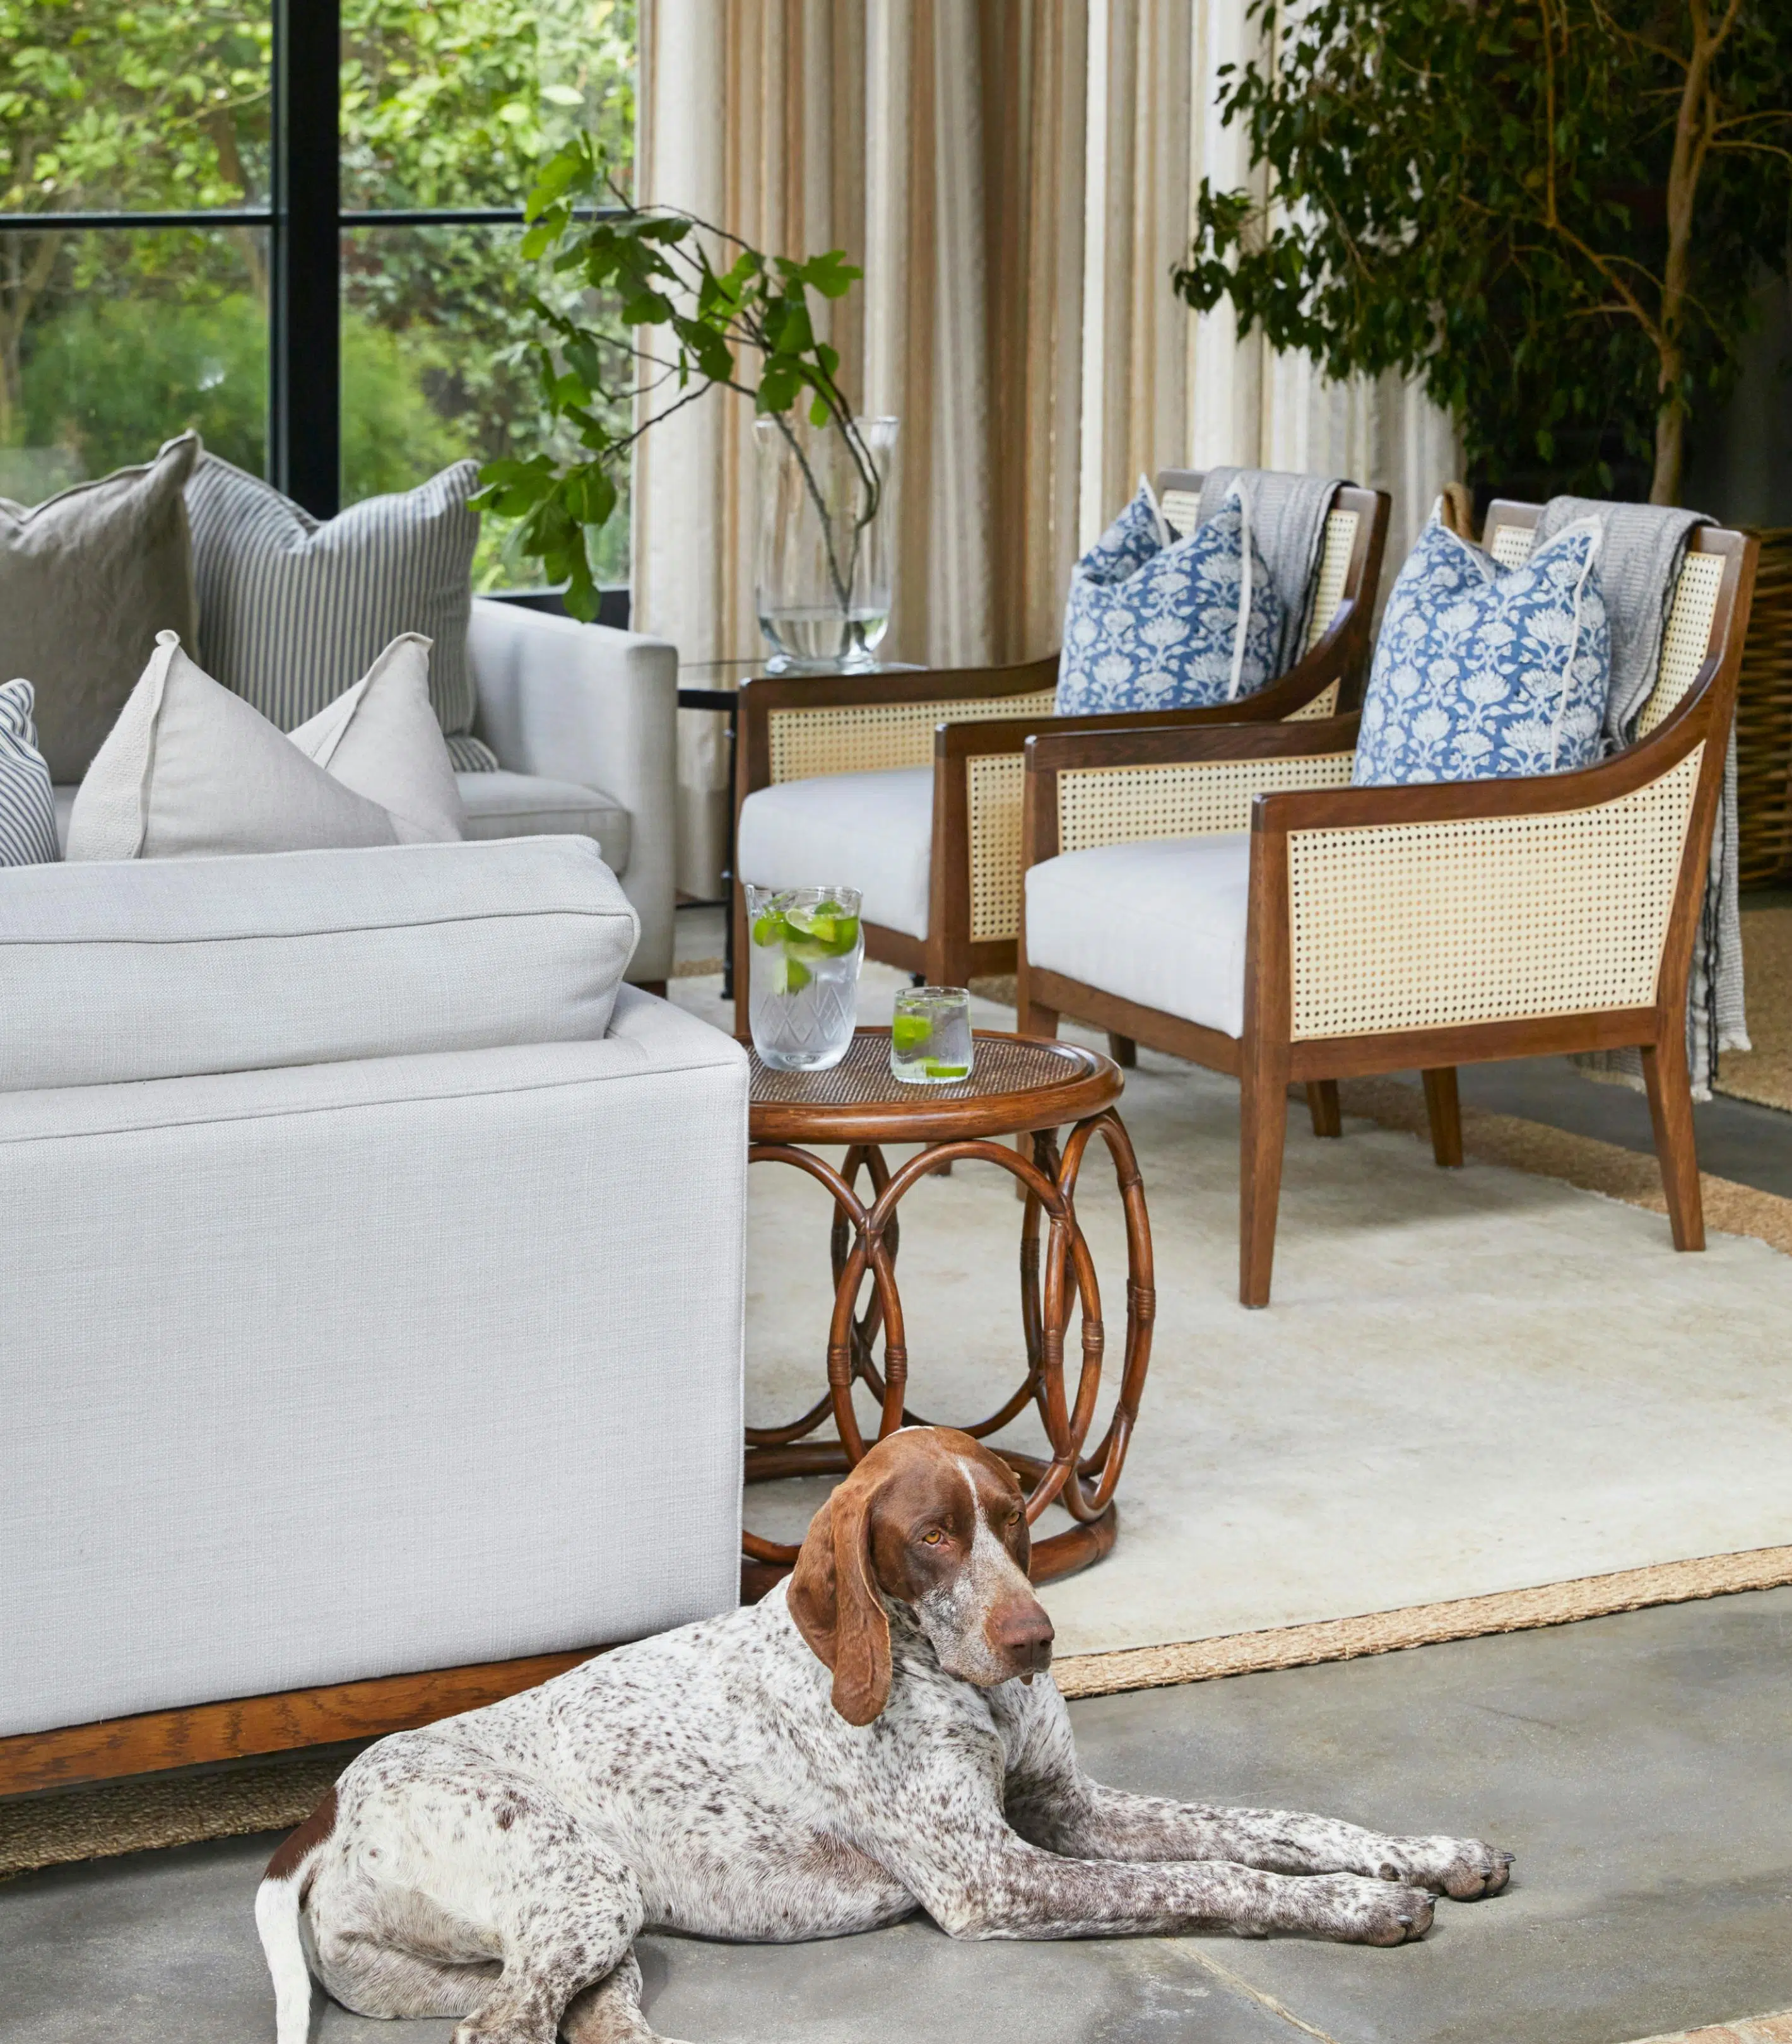 A pointer dog with a speckled coat reclines behind a couch. Behind the dog is a living area in neutral tones and polished wood